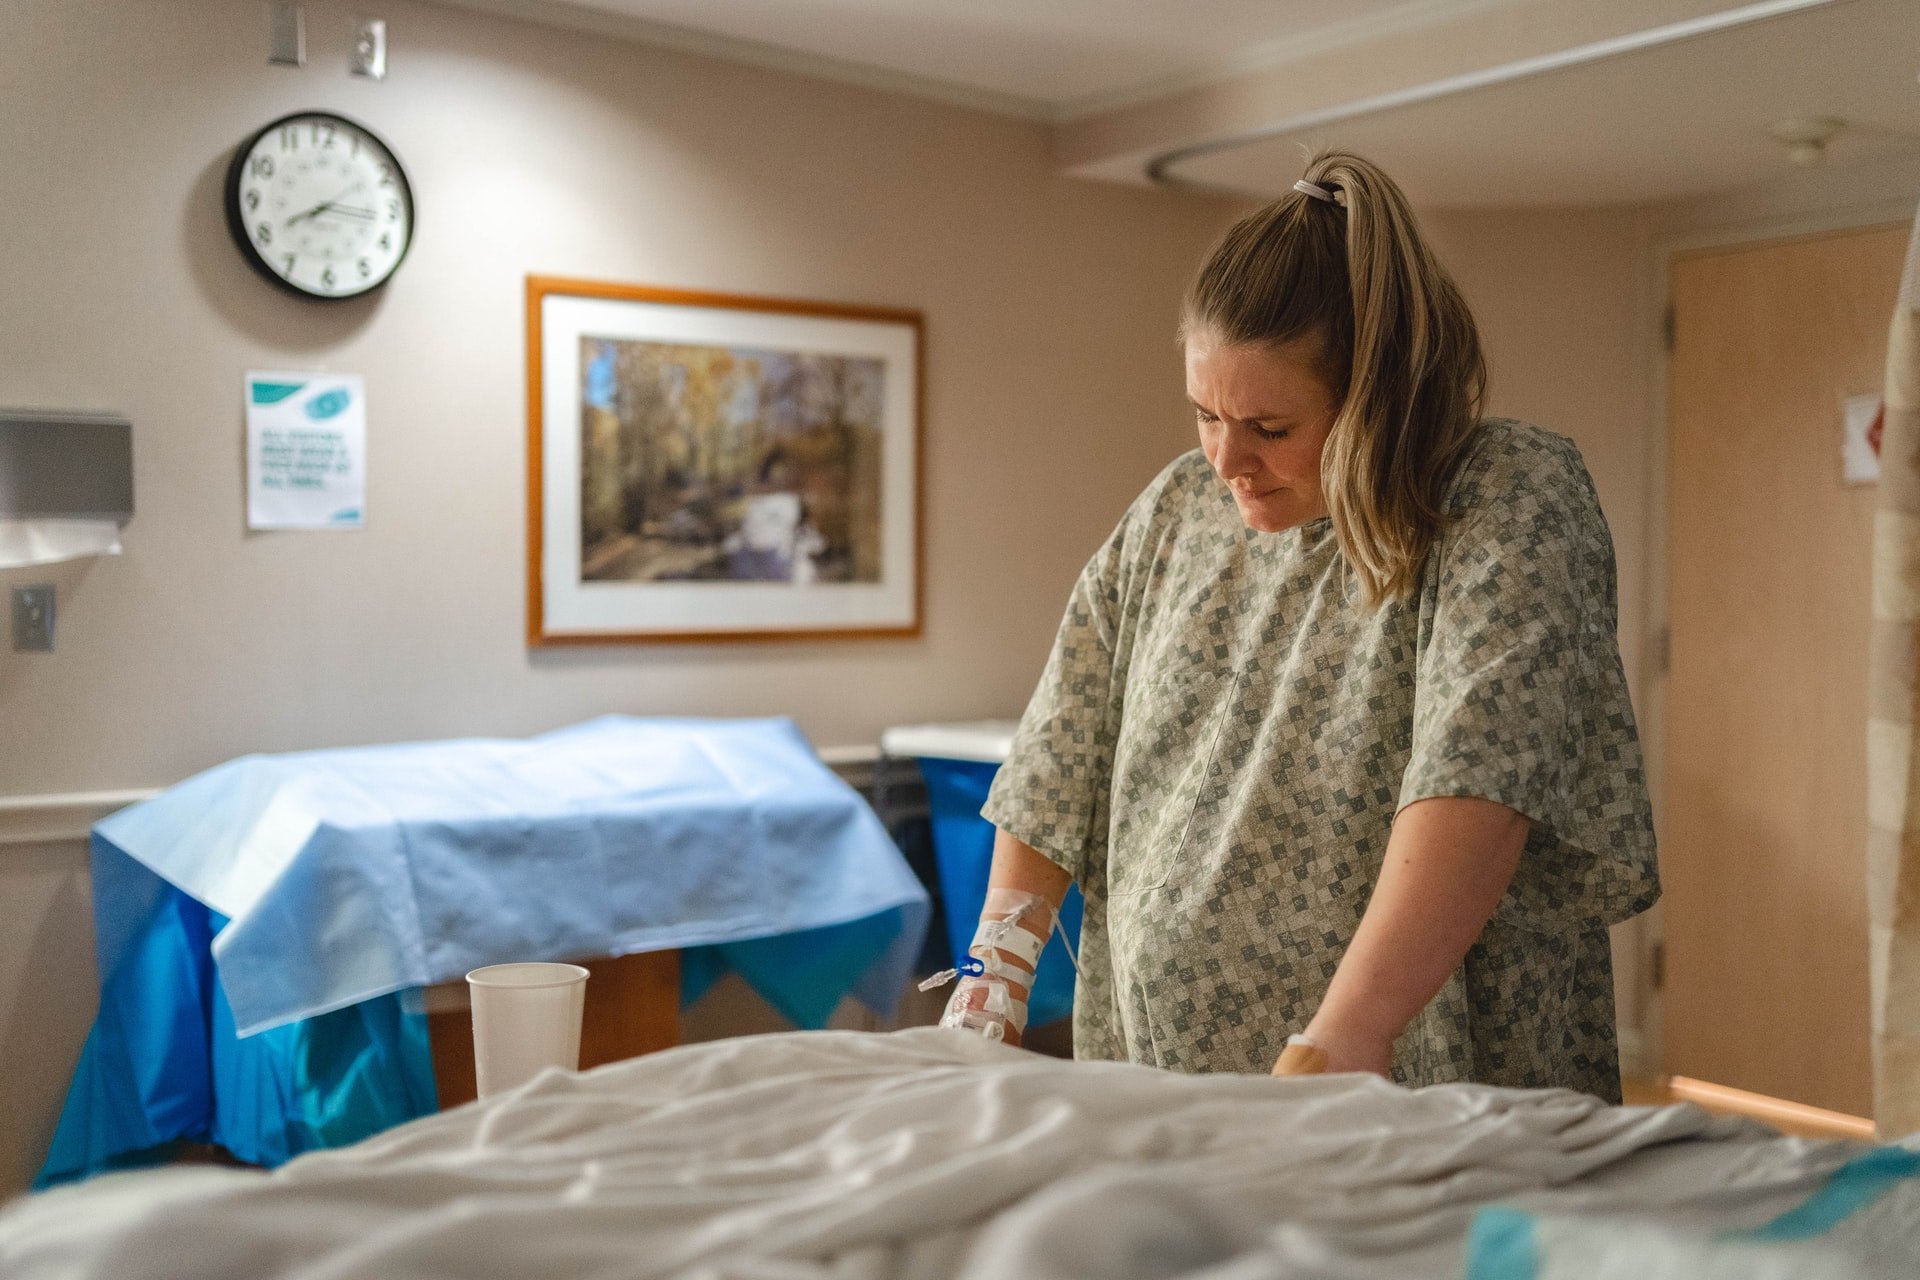 Pregnant woman in hospital room | Source: Unsplash